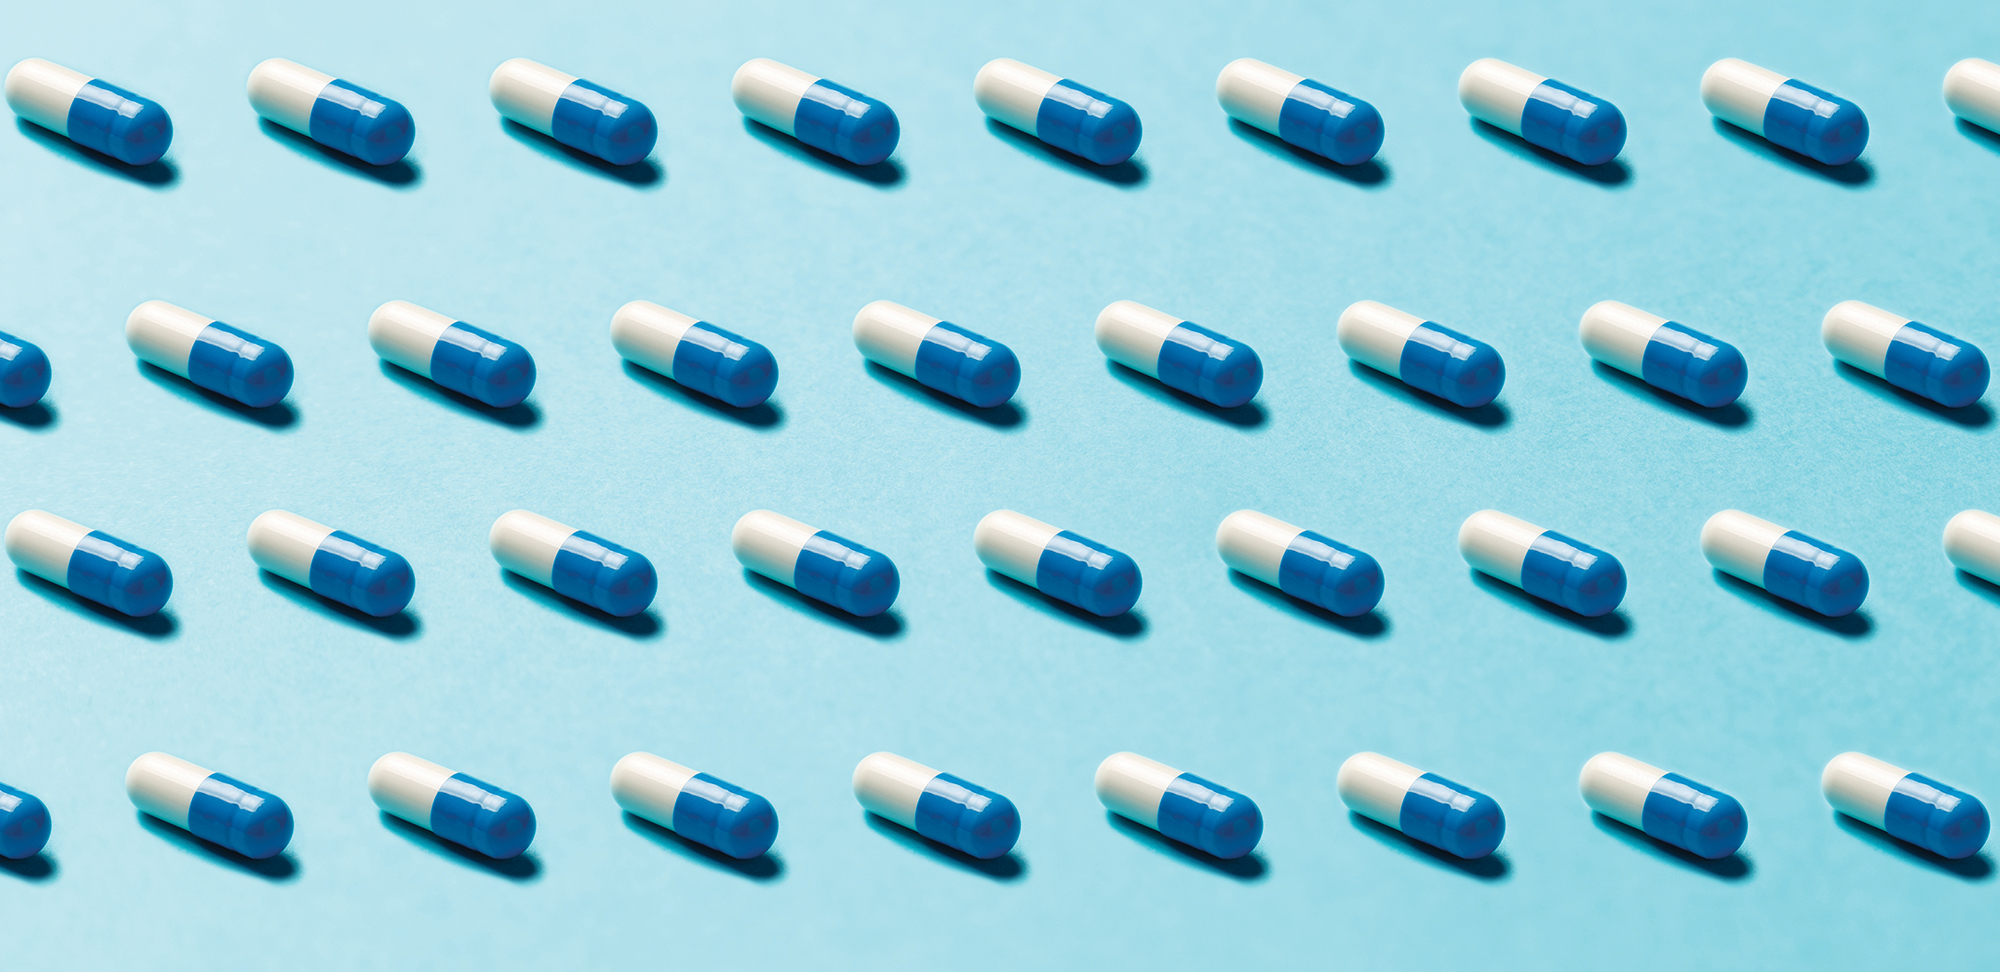 Photo of rows of identical pills on a blue background